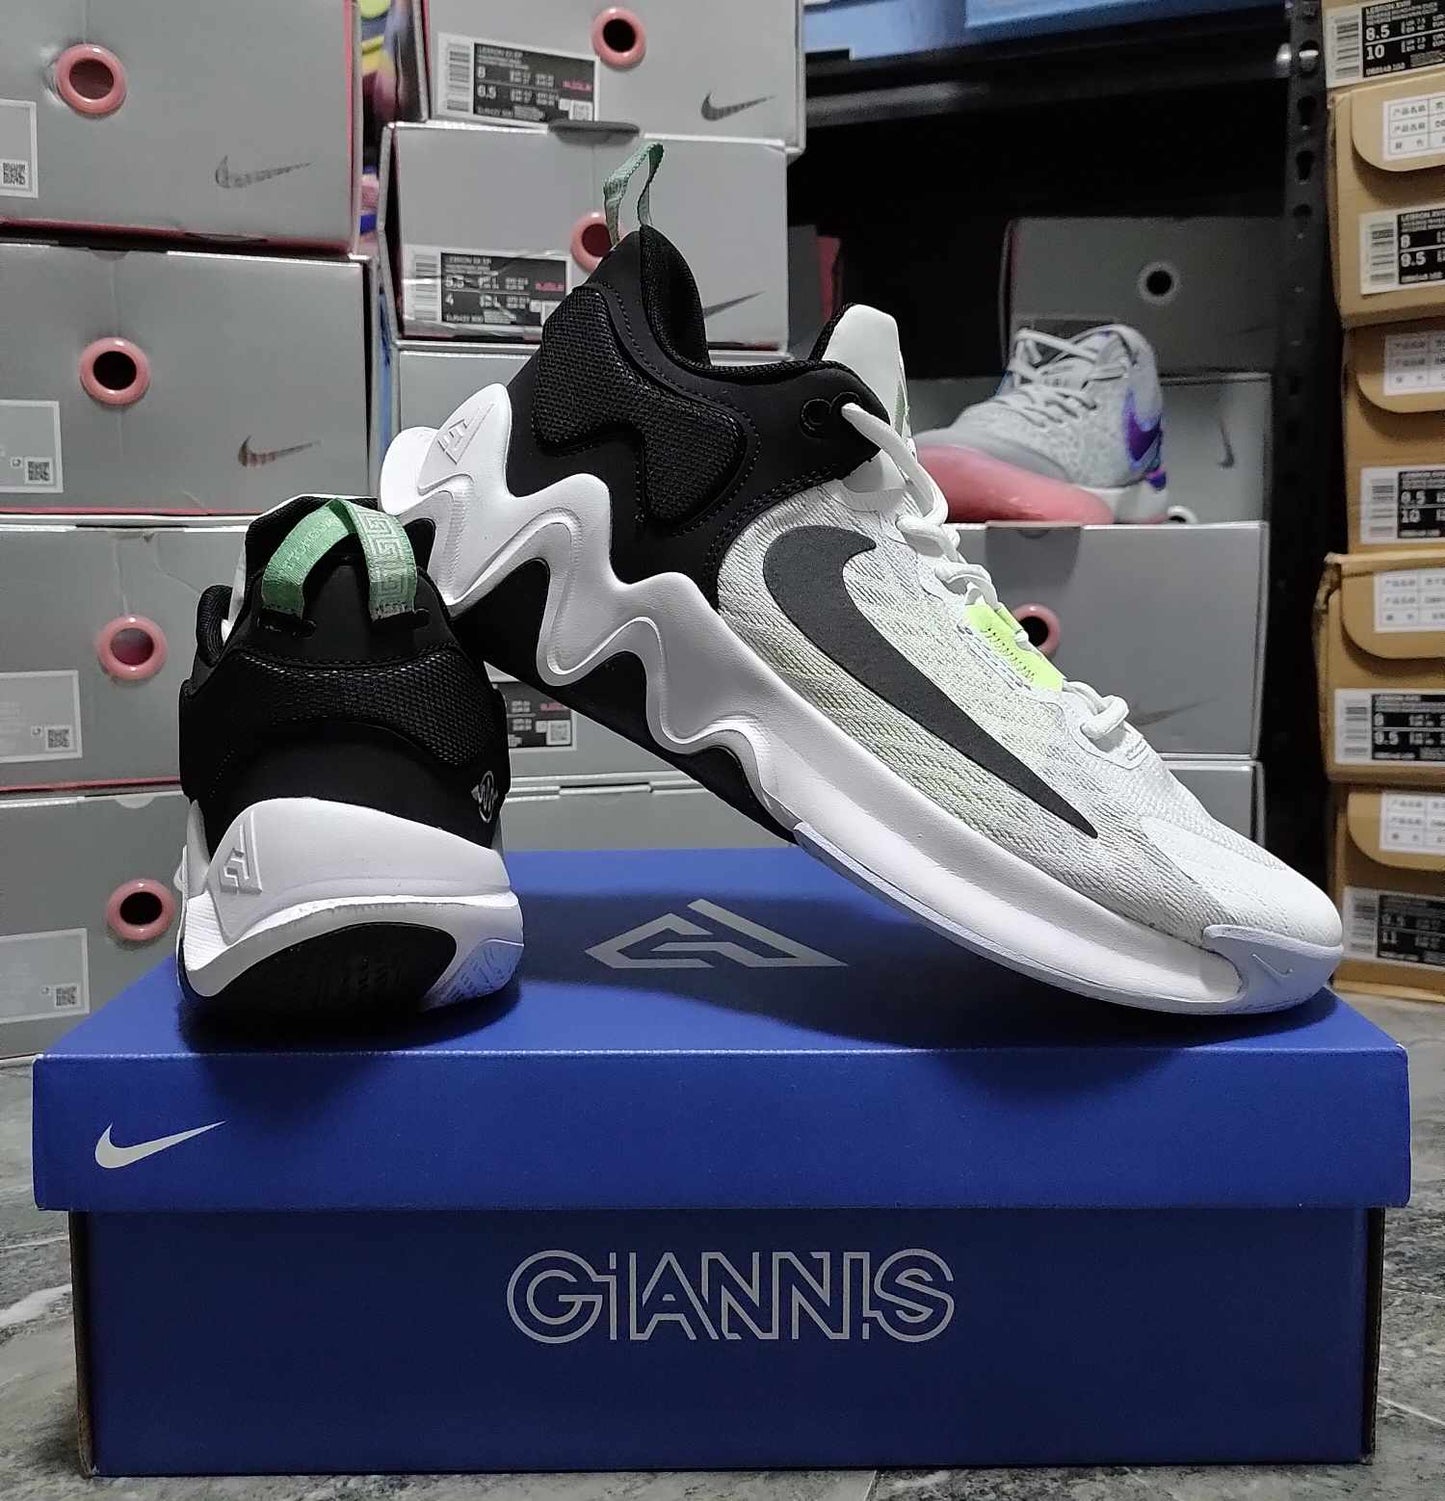 Giannis Immortality 2 "White Barely Volt"